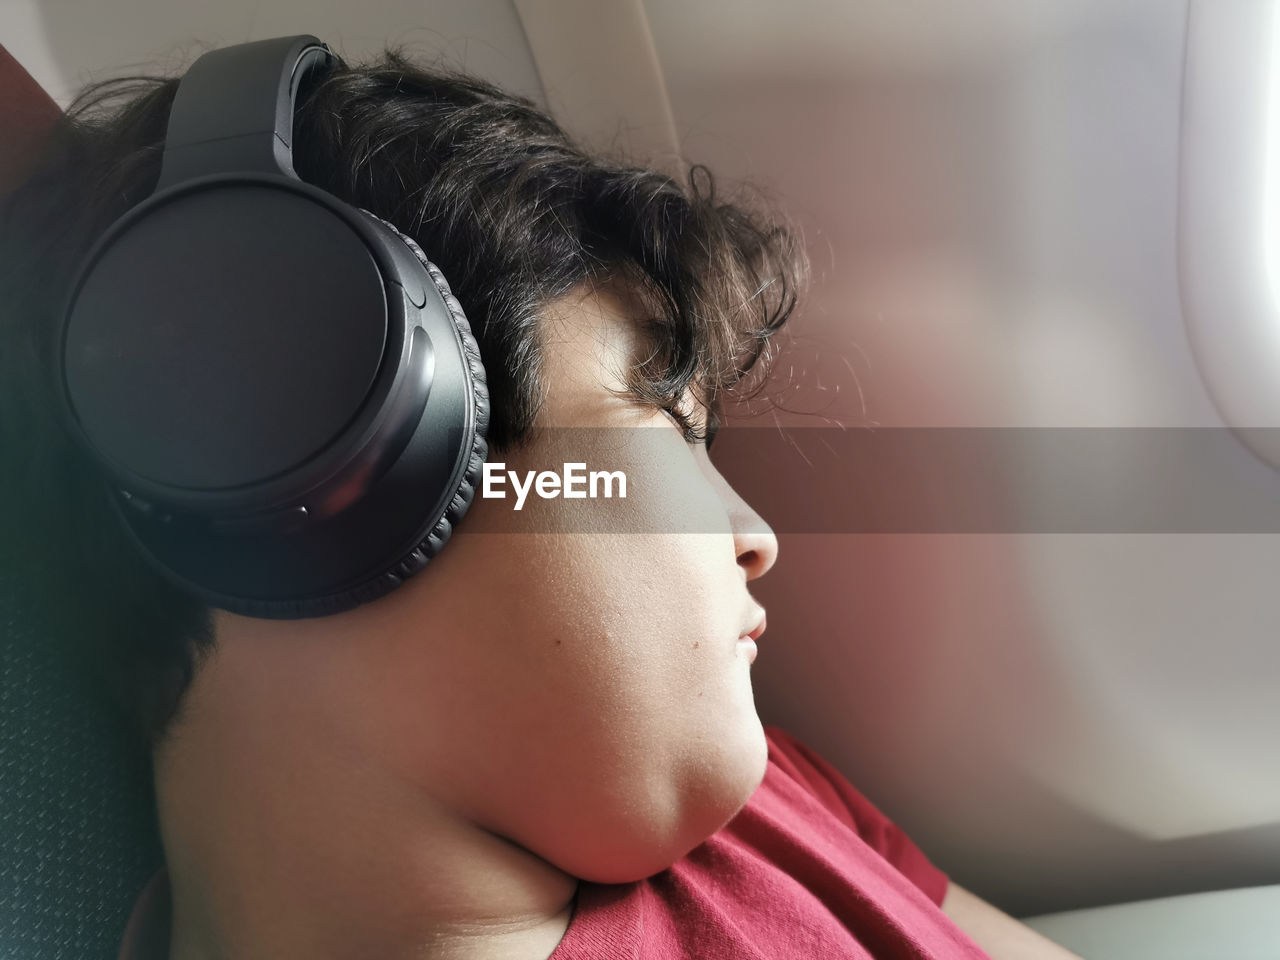 Boy relaxing listening to music on headphone during flight.